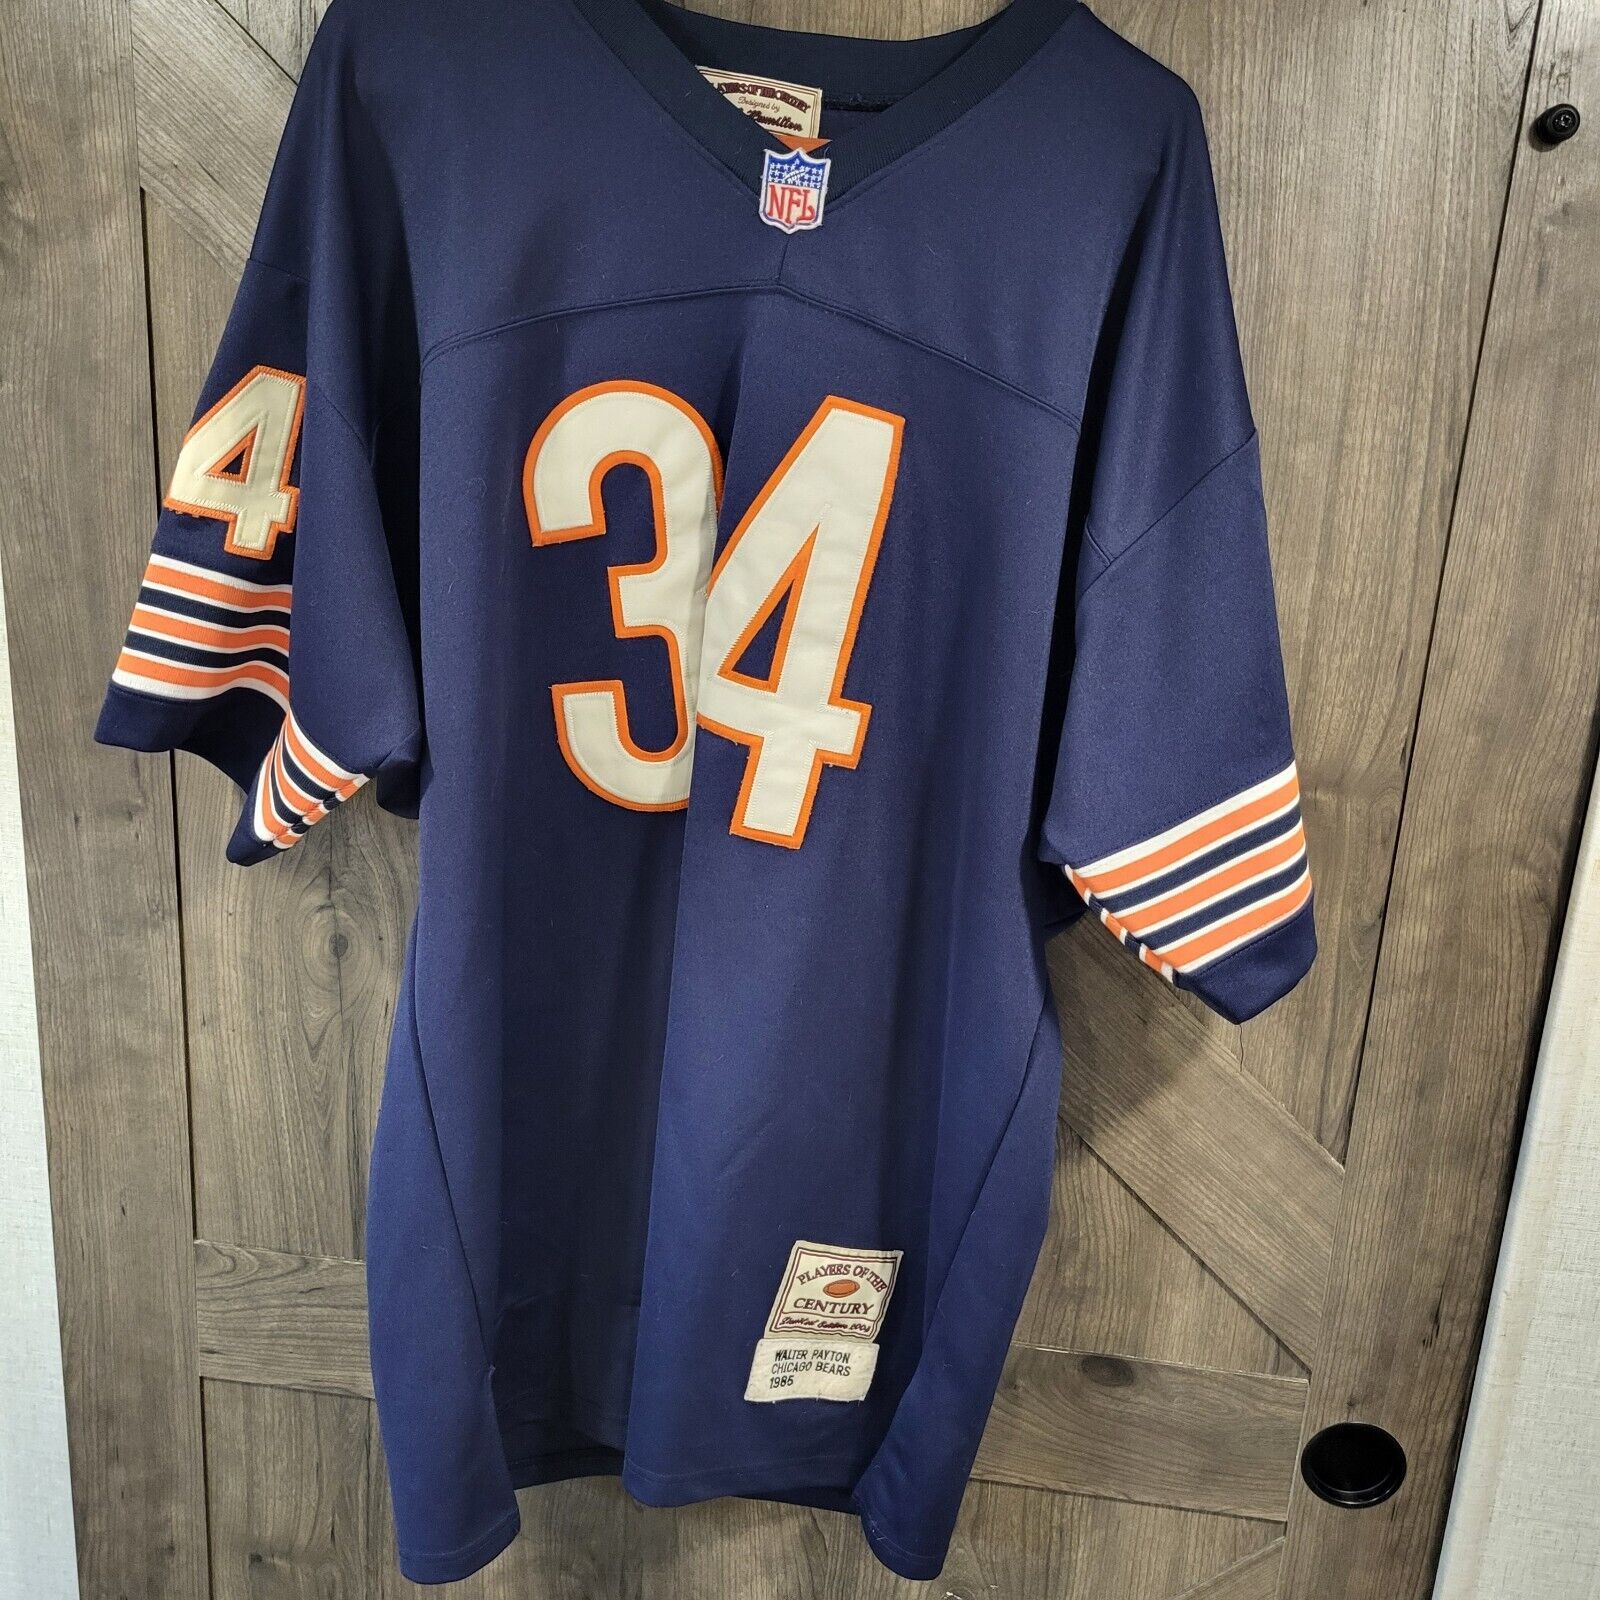 Primary image for WALTER PAYTON PLAYERS OF THE CENTURY MENS SIZE 52 XL NAVY JERSEY JEFF HAMILTON